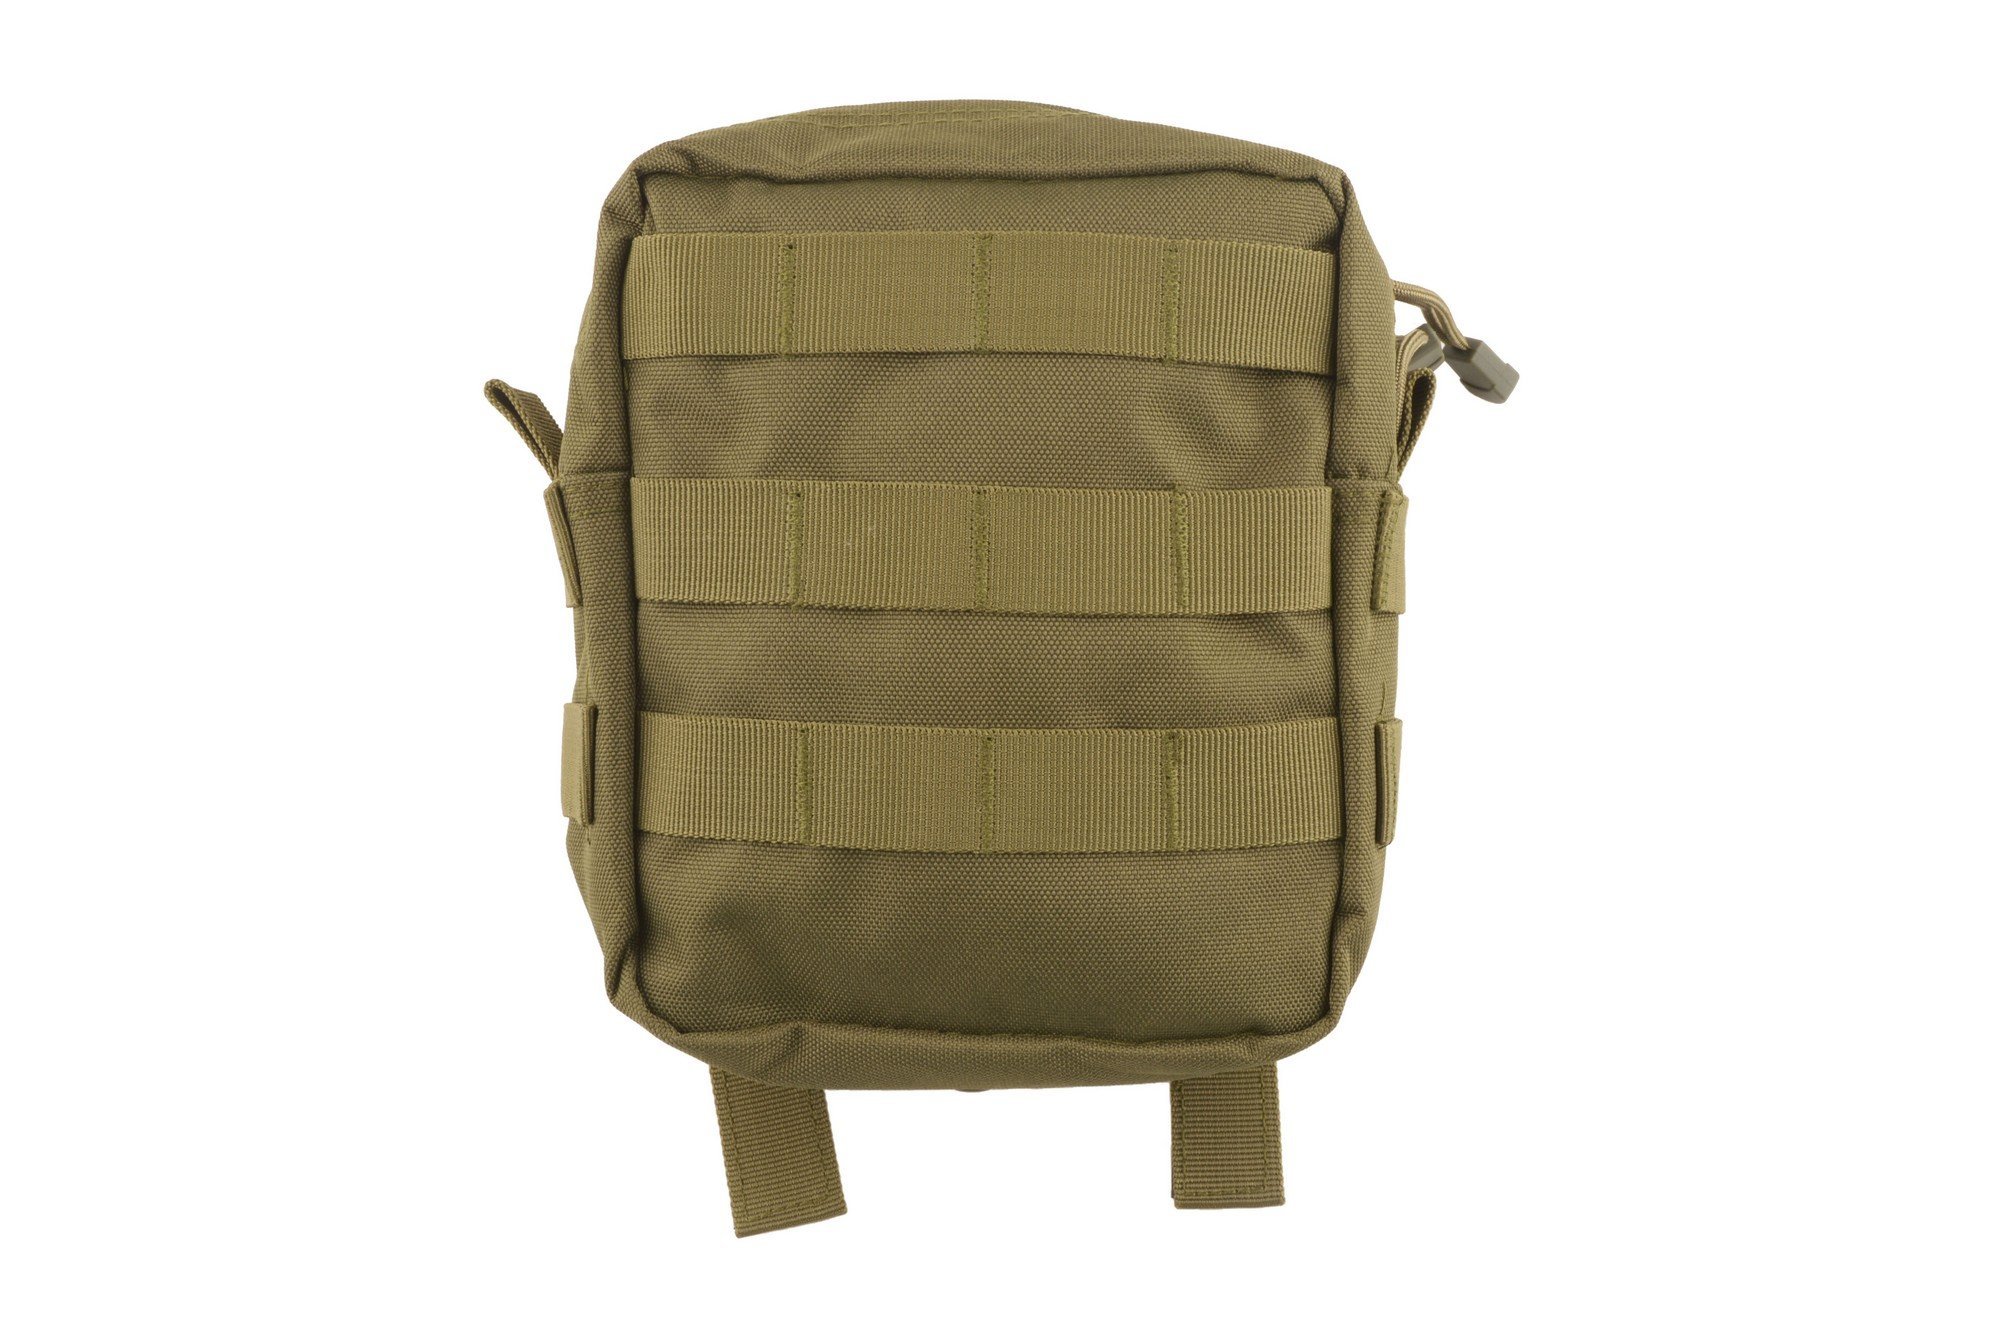 GFT Cargo Pouch - Olive Drab